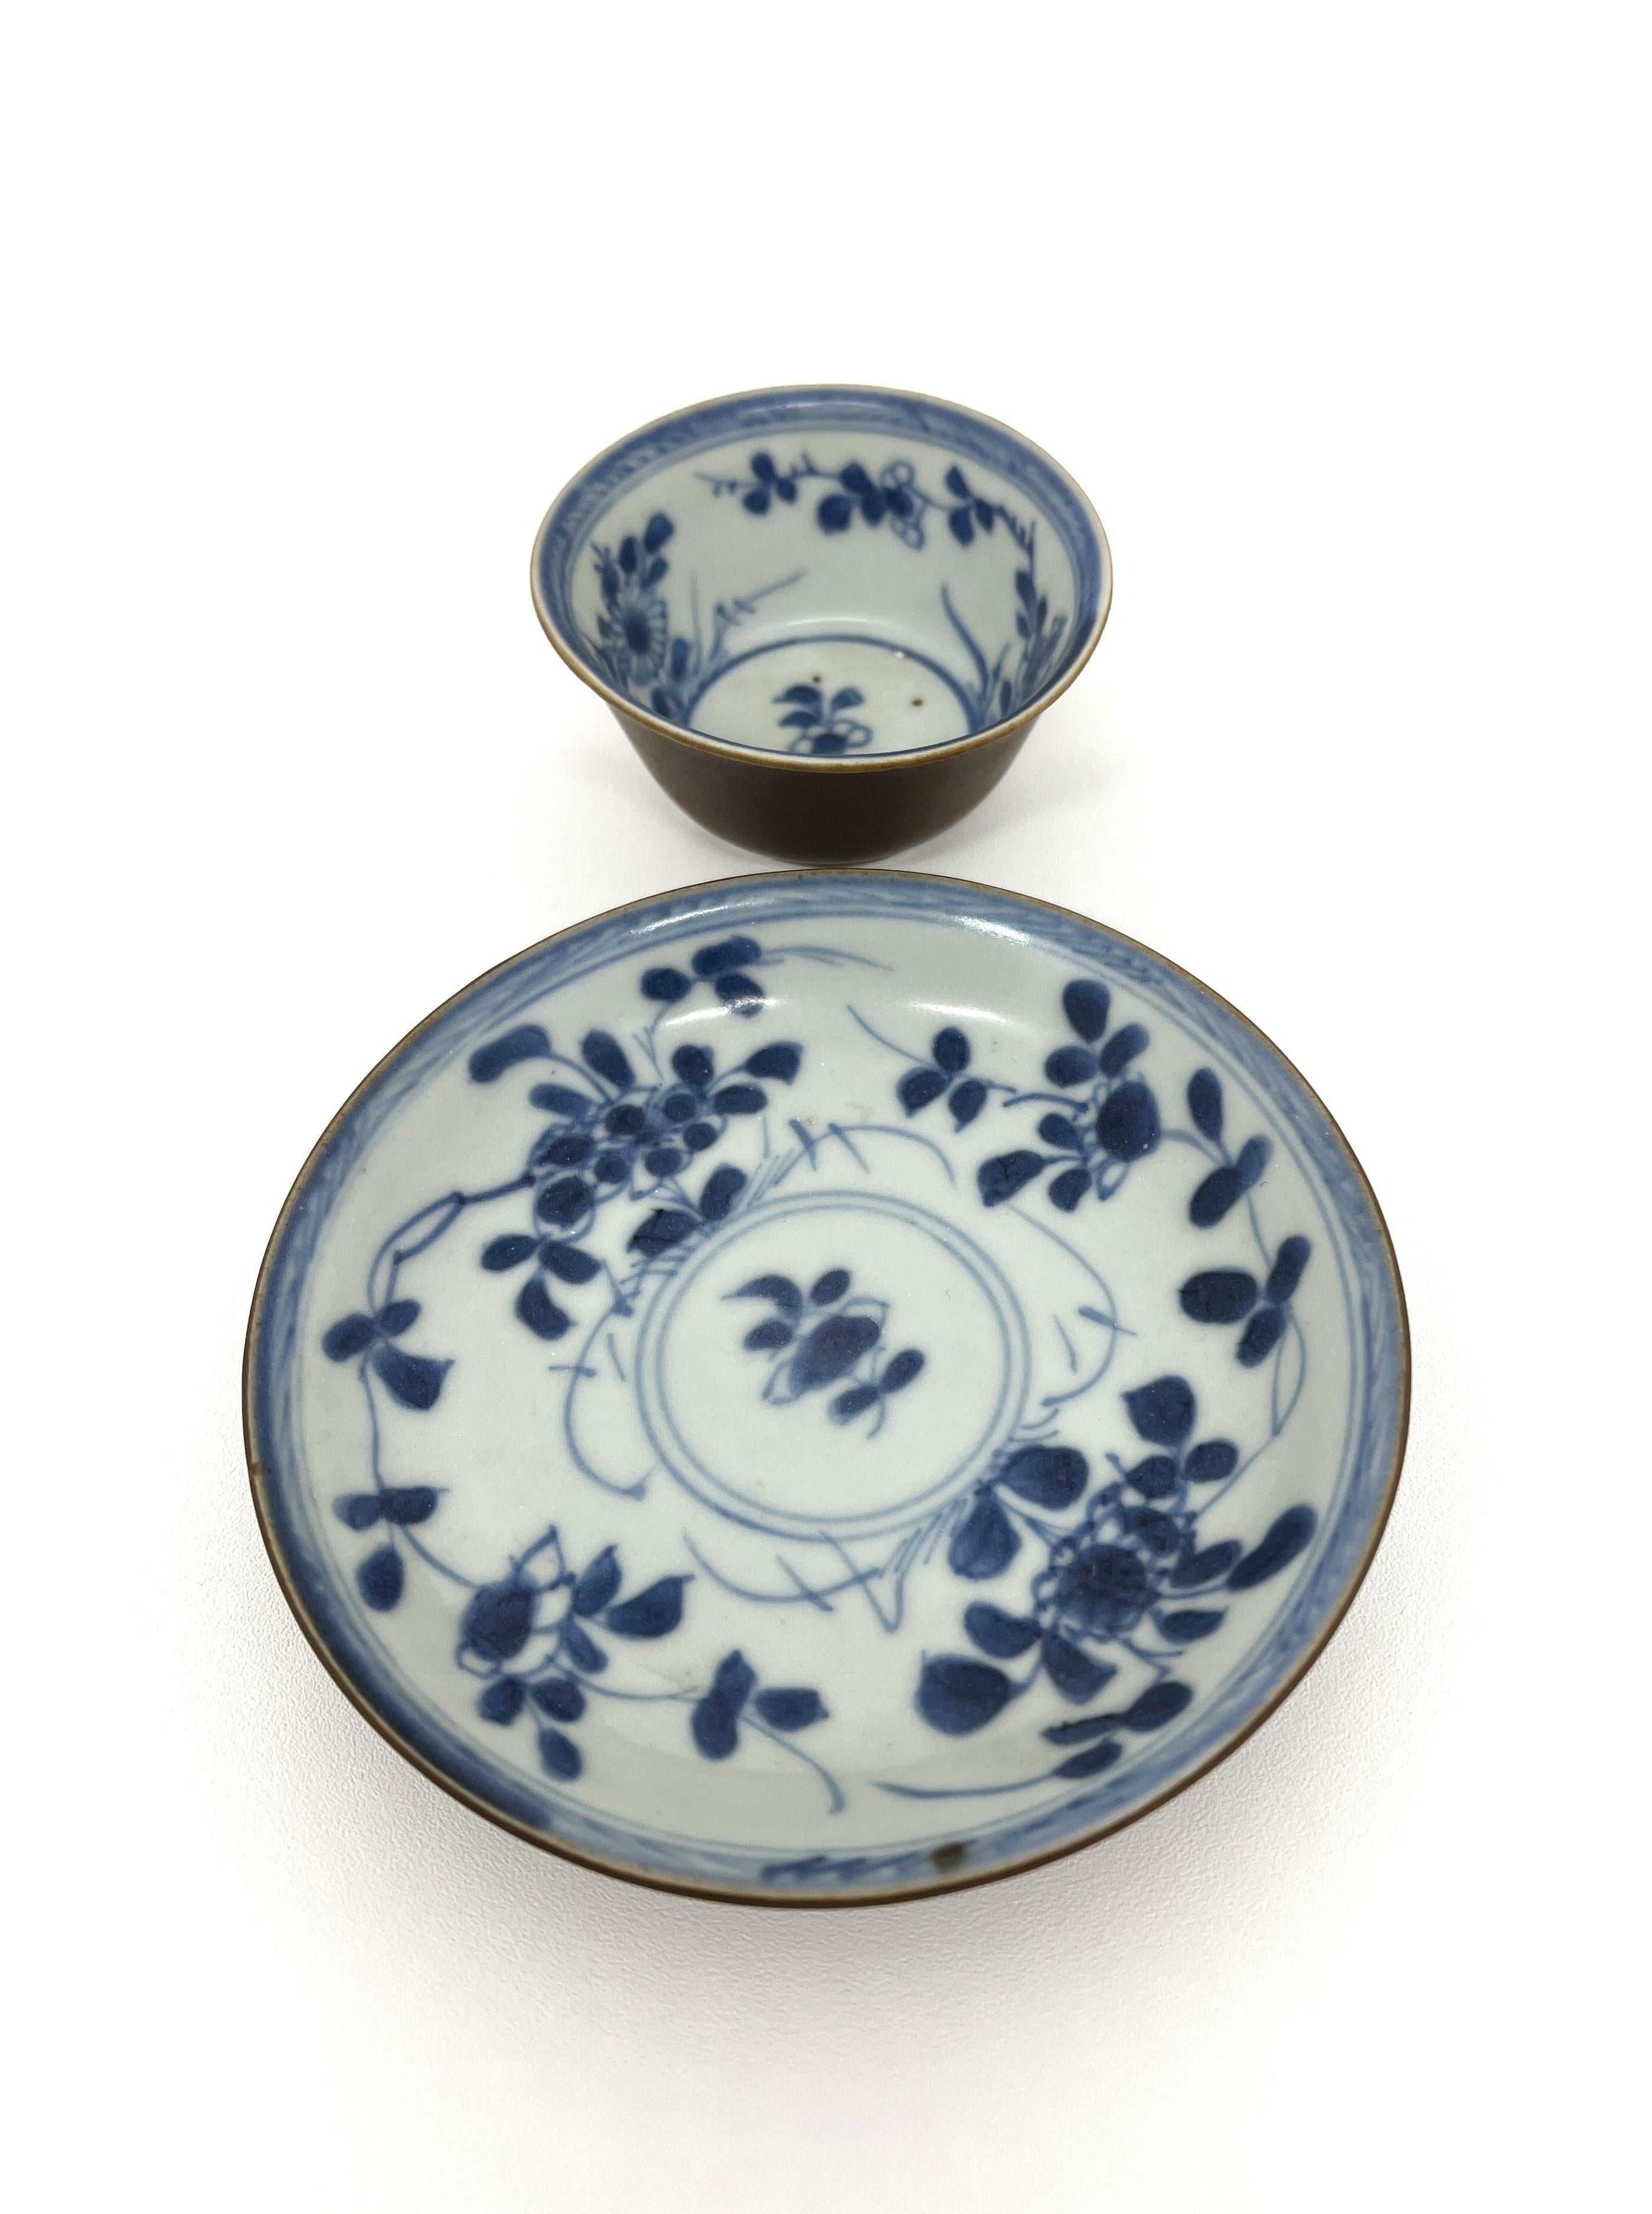 Chinese Blue And White Teabowl And Saucer Set Circa 1725, Qing Dynasty, Yongzheng Era For Sale